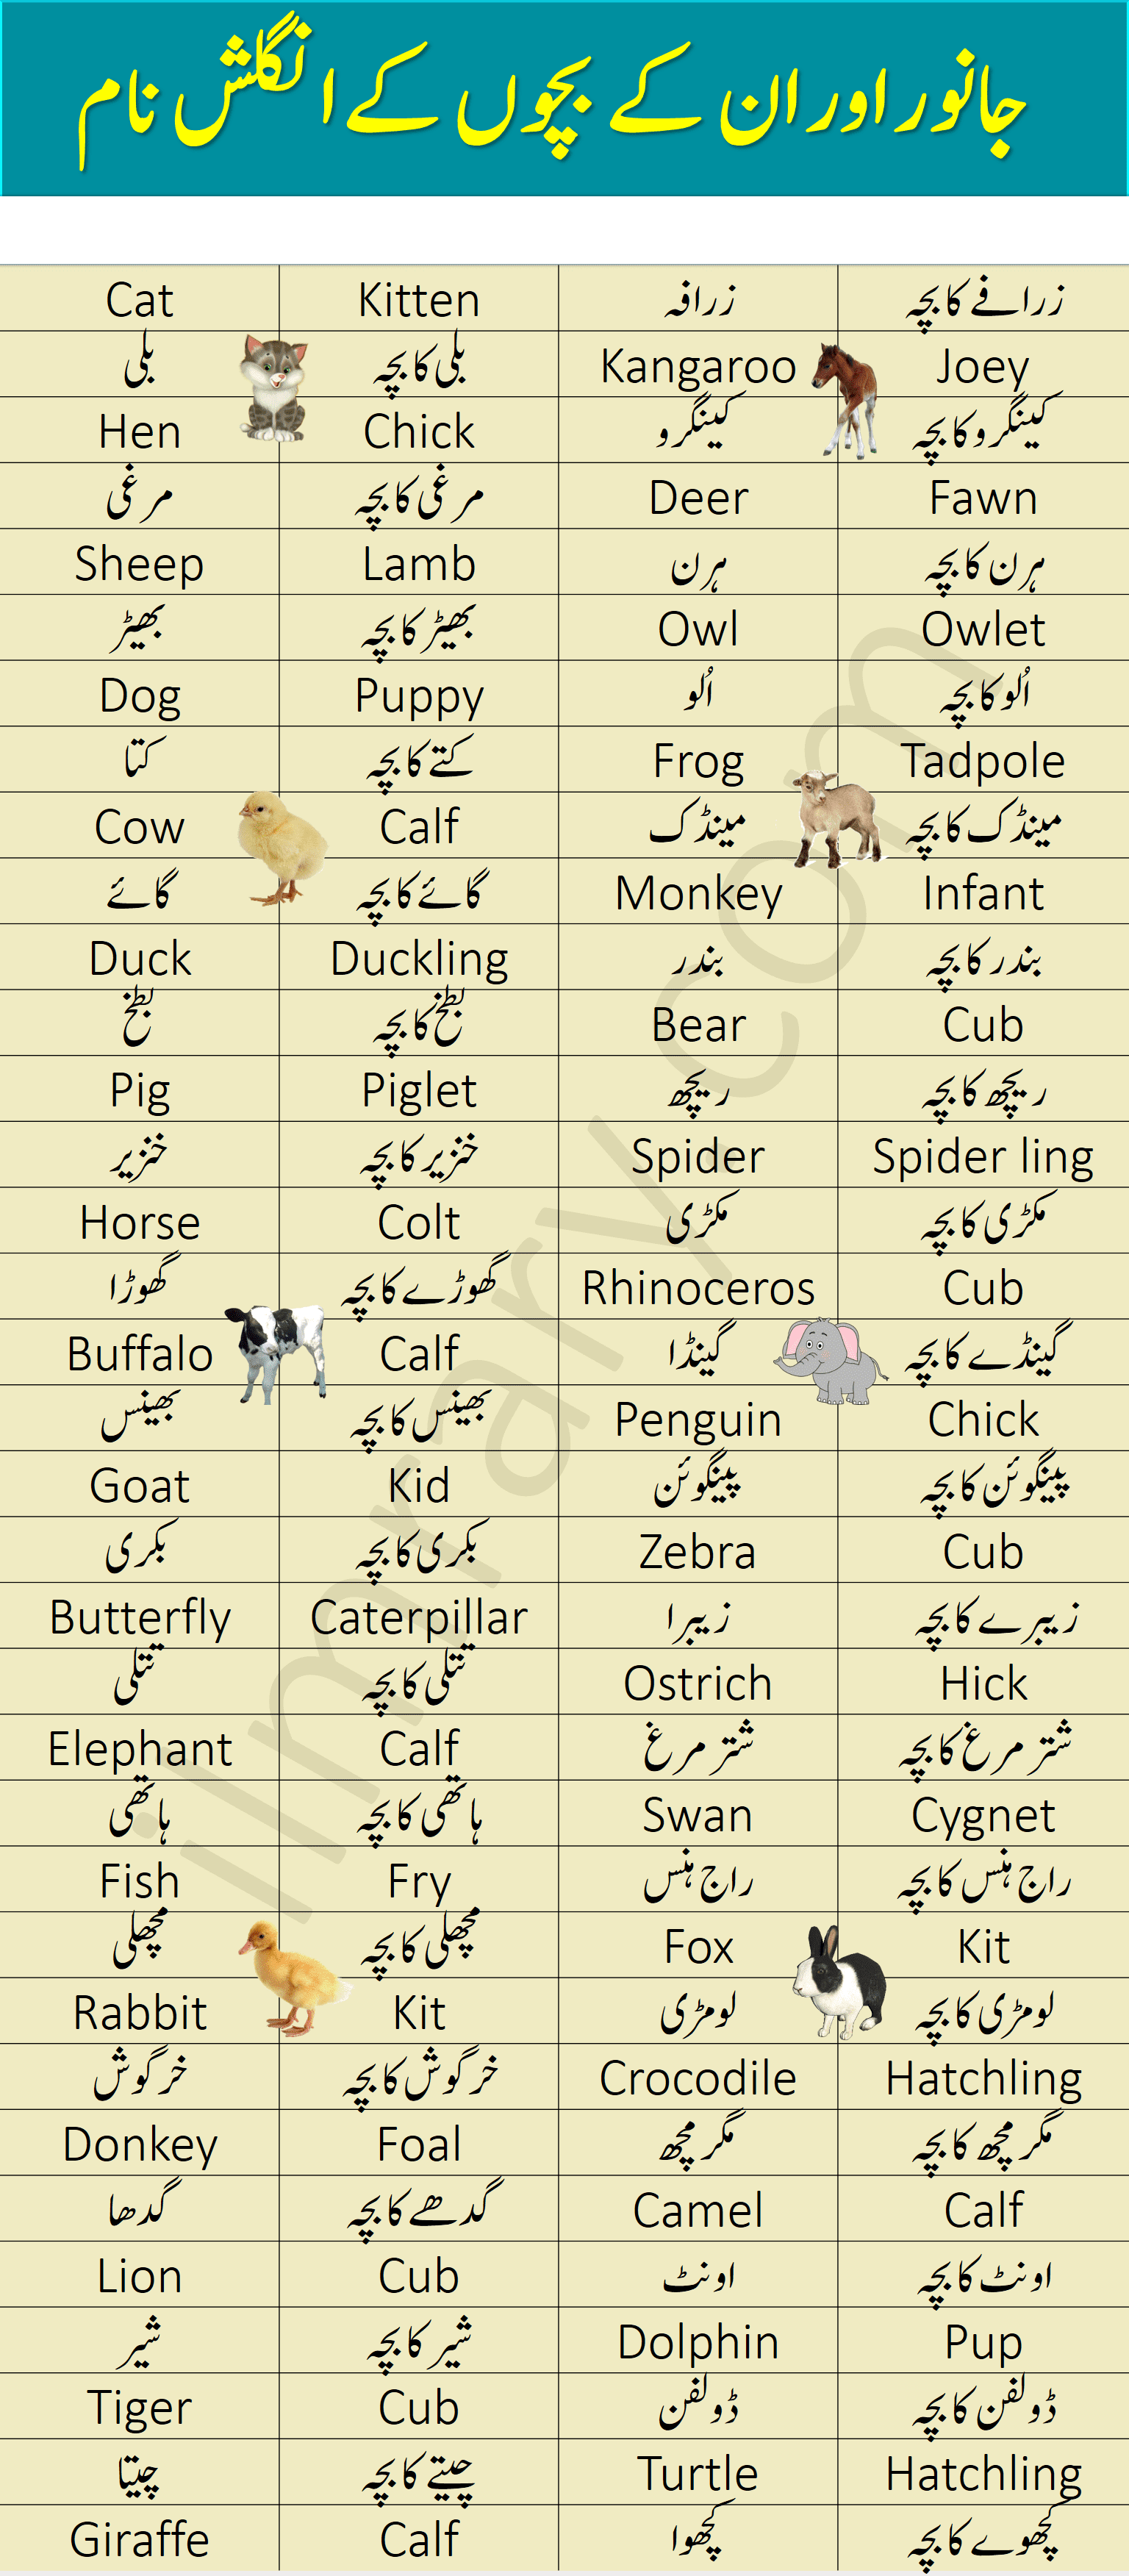 Animals and their Babies Names in English with Urdu Meanings - iLmrary